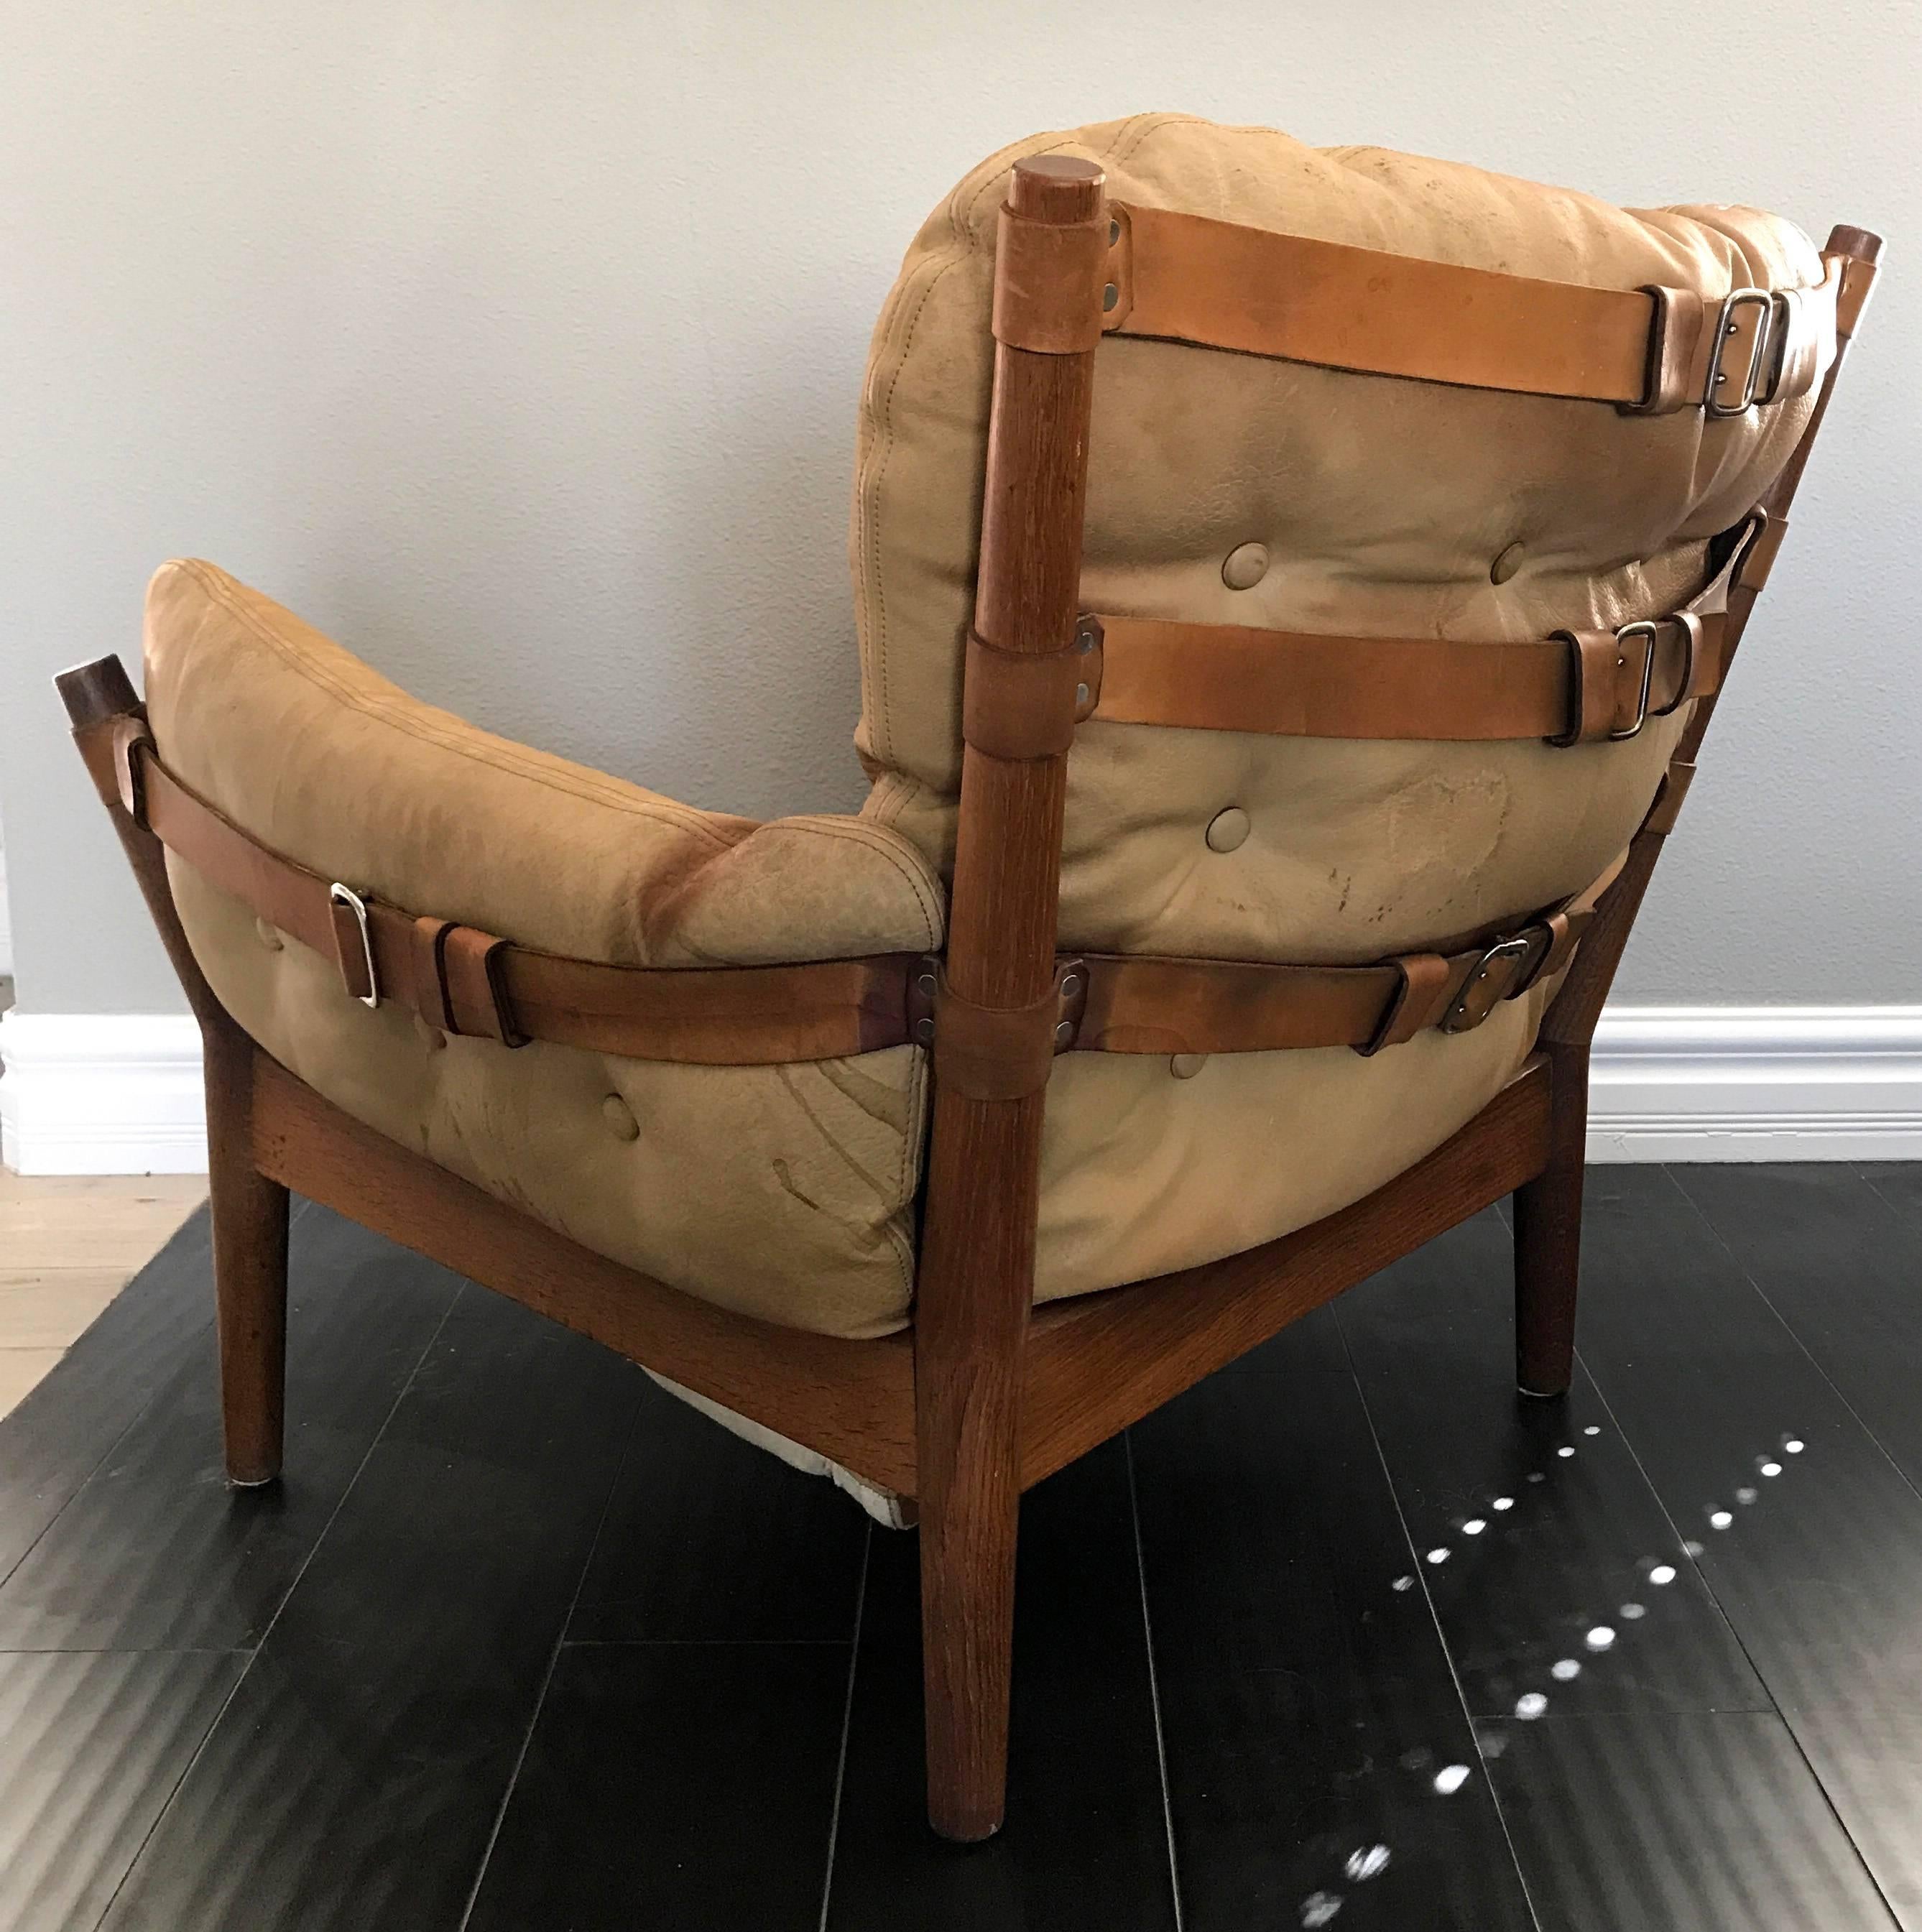 A rare low-slung easy chair by John Mortensen for Magnus Olesen (Denmark). This stunning lounge chair appears almost as a more masculine version of a Norell safari chair, featuring a triple leather-belted back, as well as belted arms and stunning